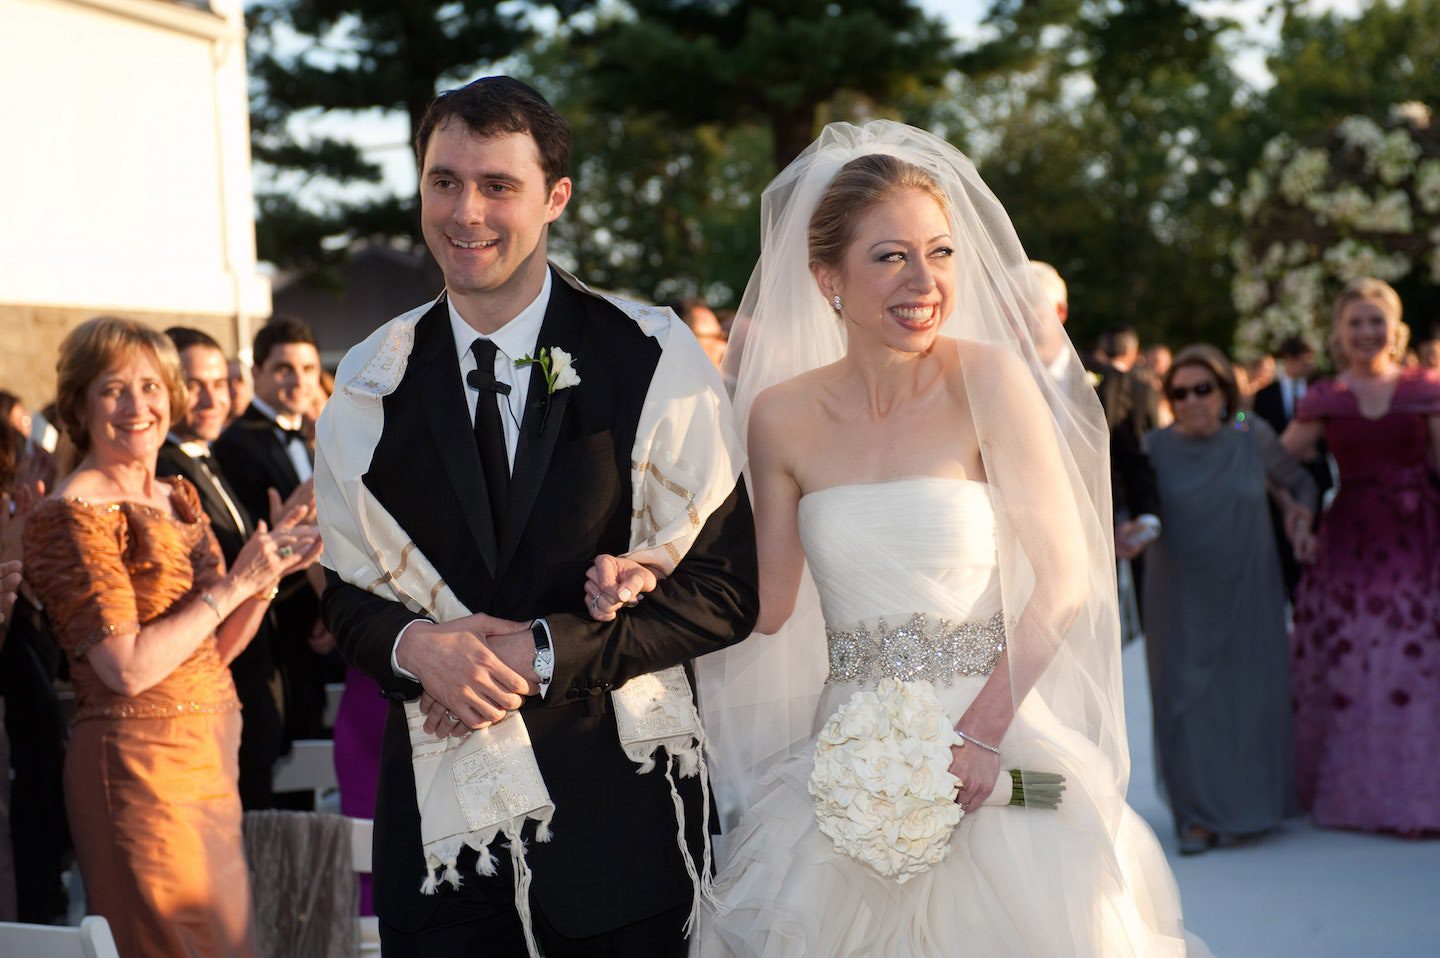 when did chelsea clinton get married